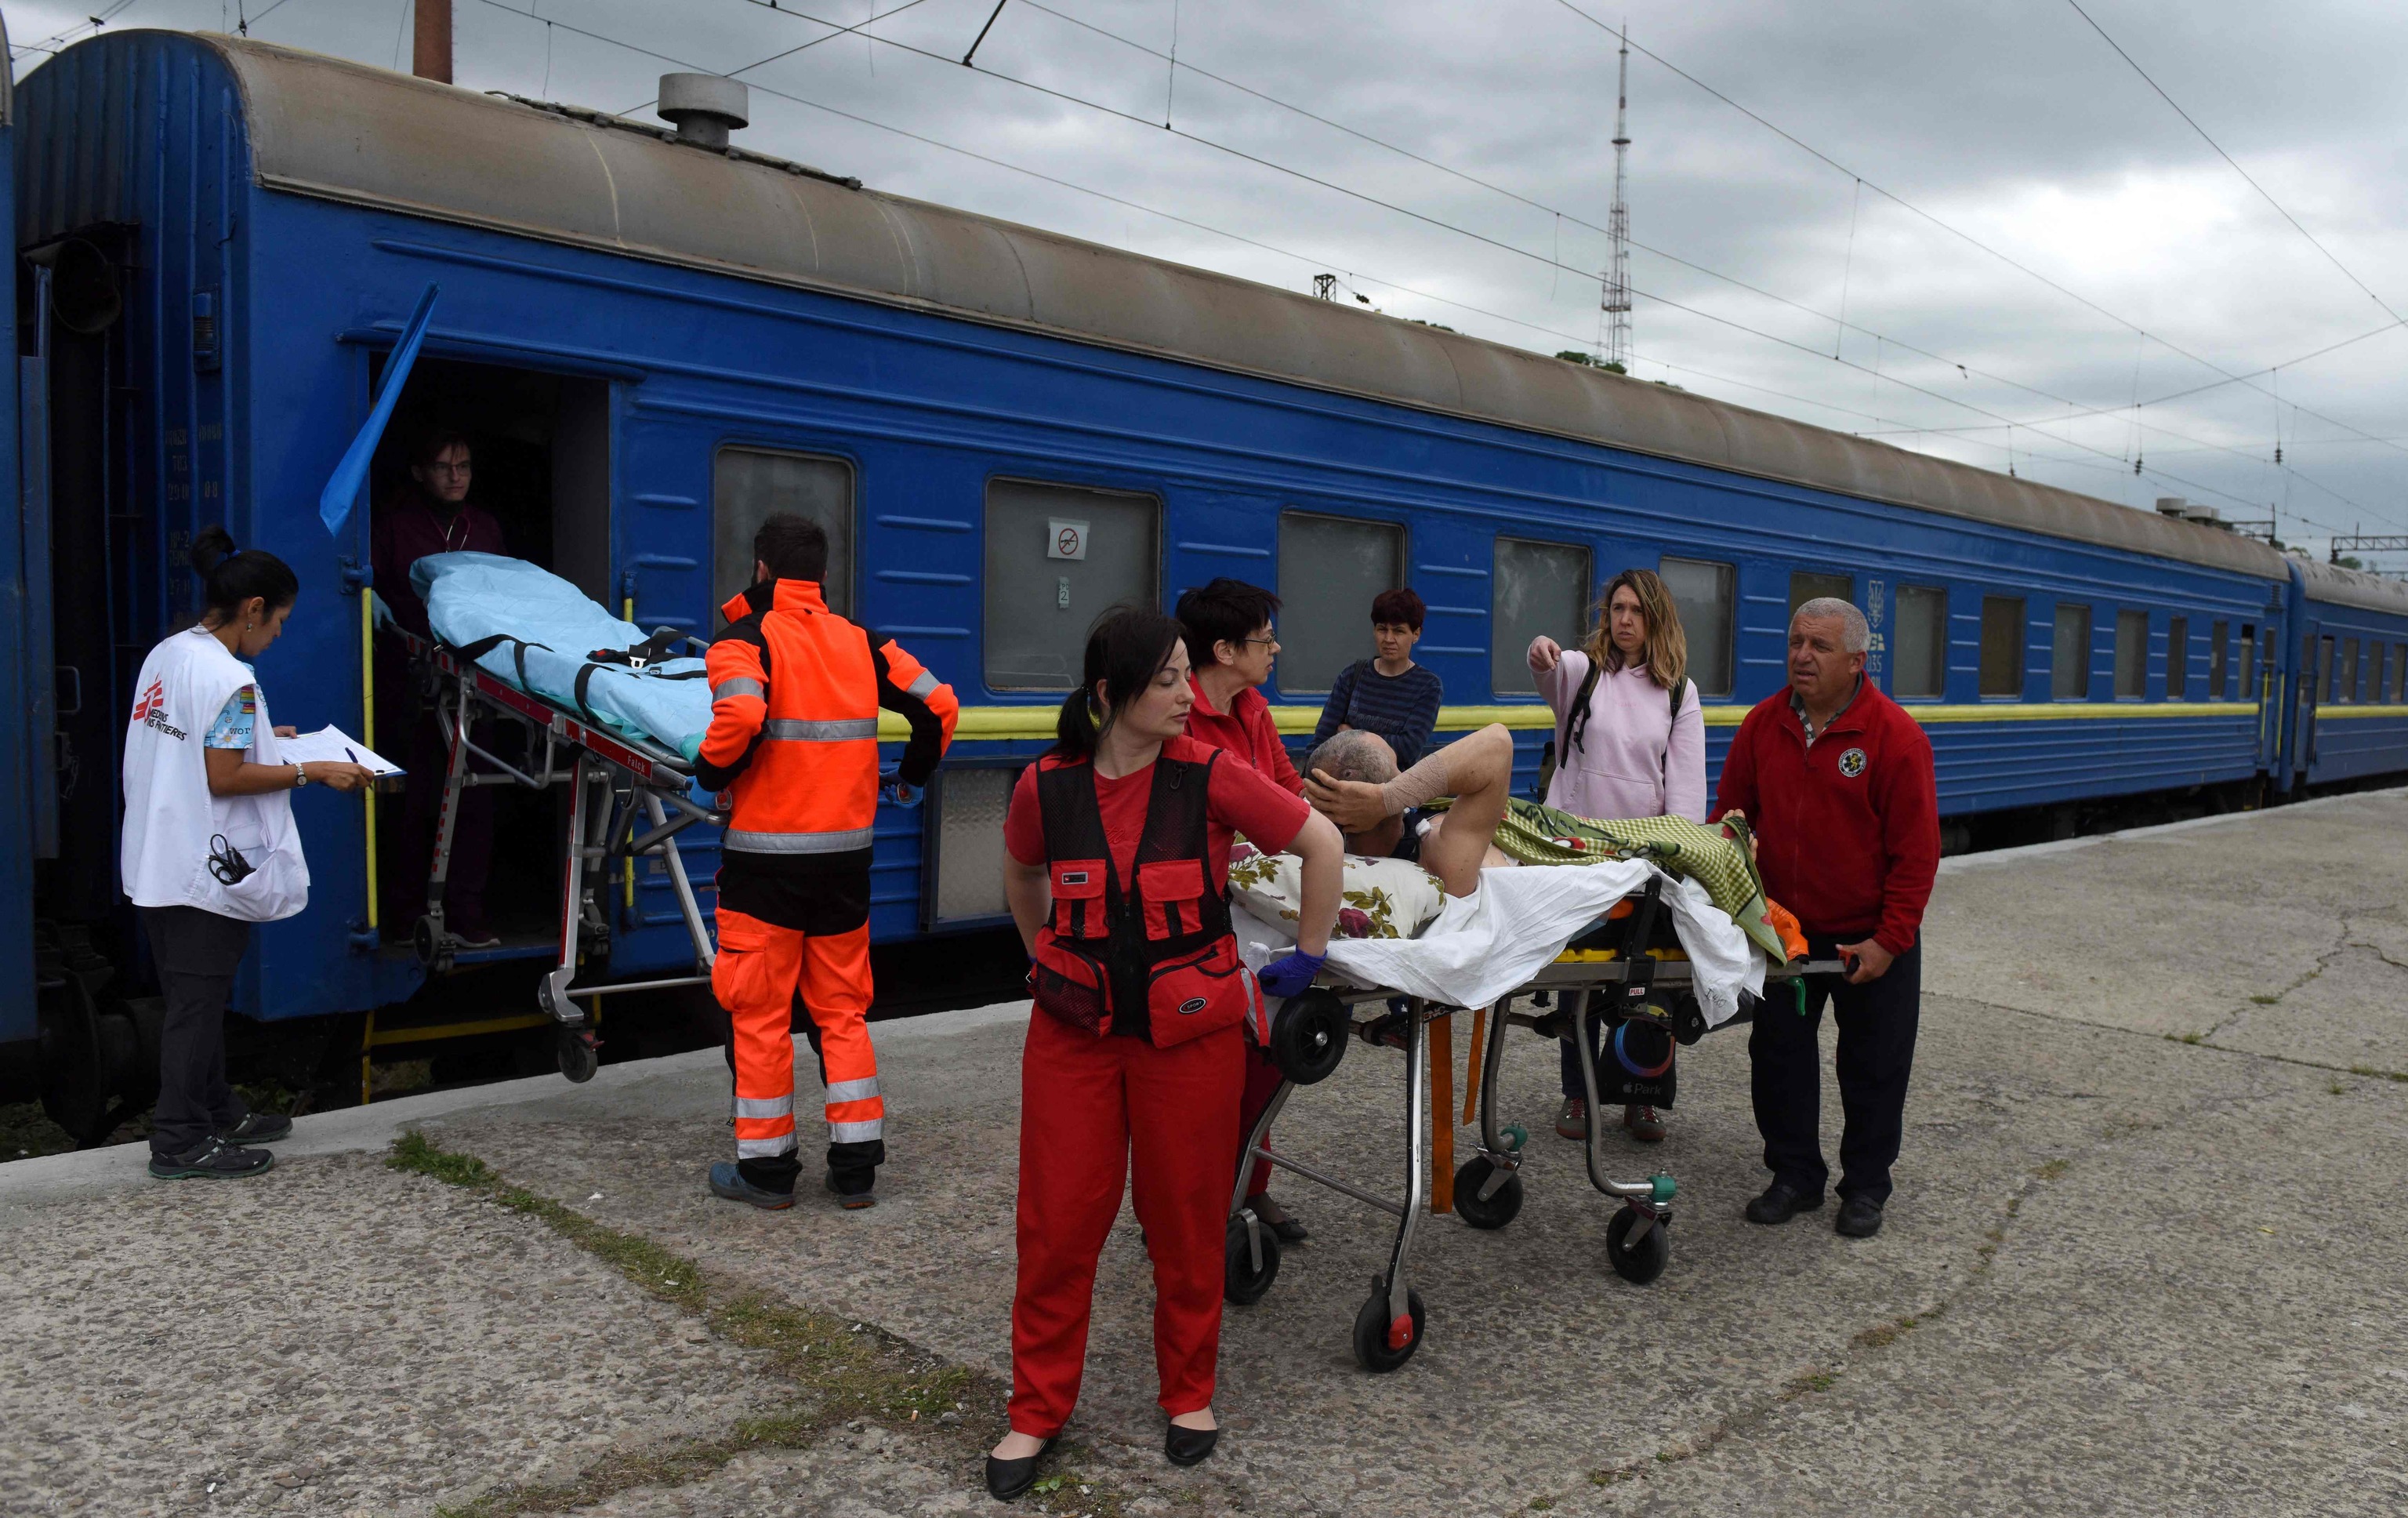 File image of a train carrying wounded Ukrainian soldiers.